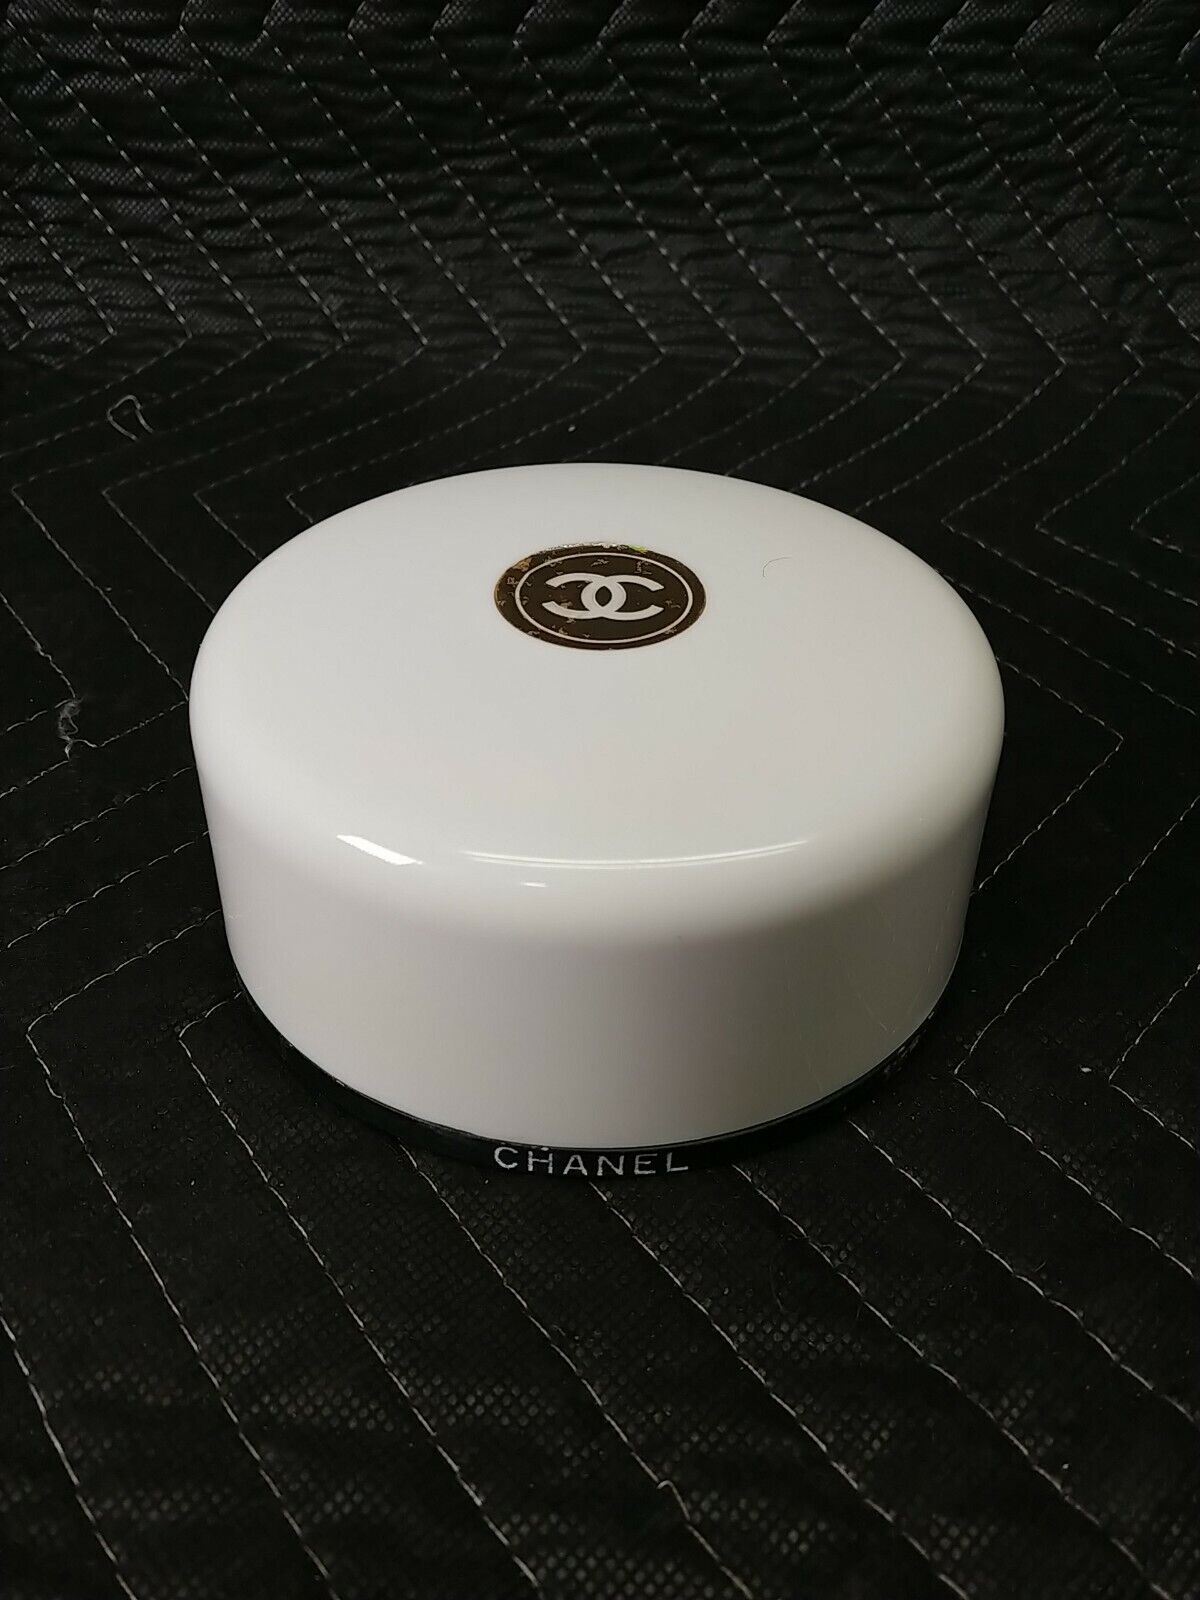 Chanel No 5 After Bath Body Powder 5 OZ New Old Stock Boxed